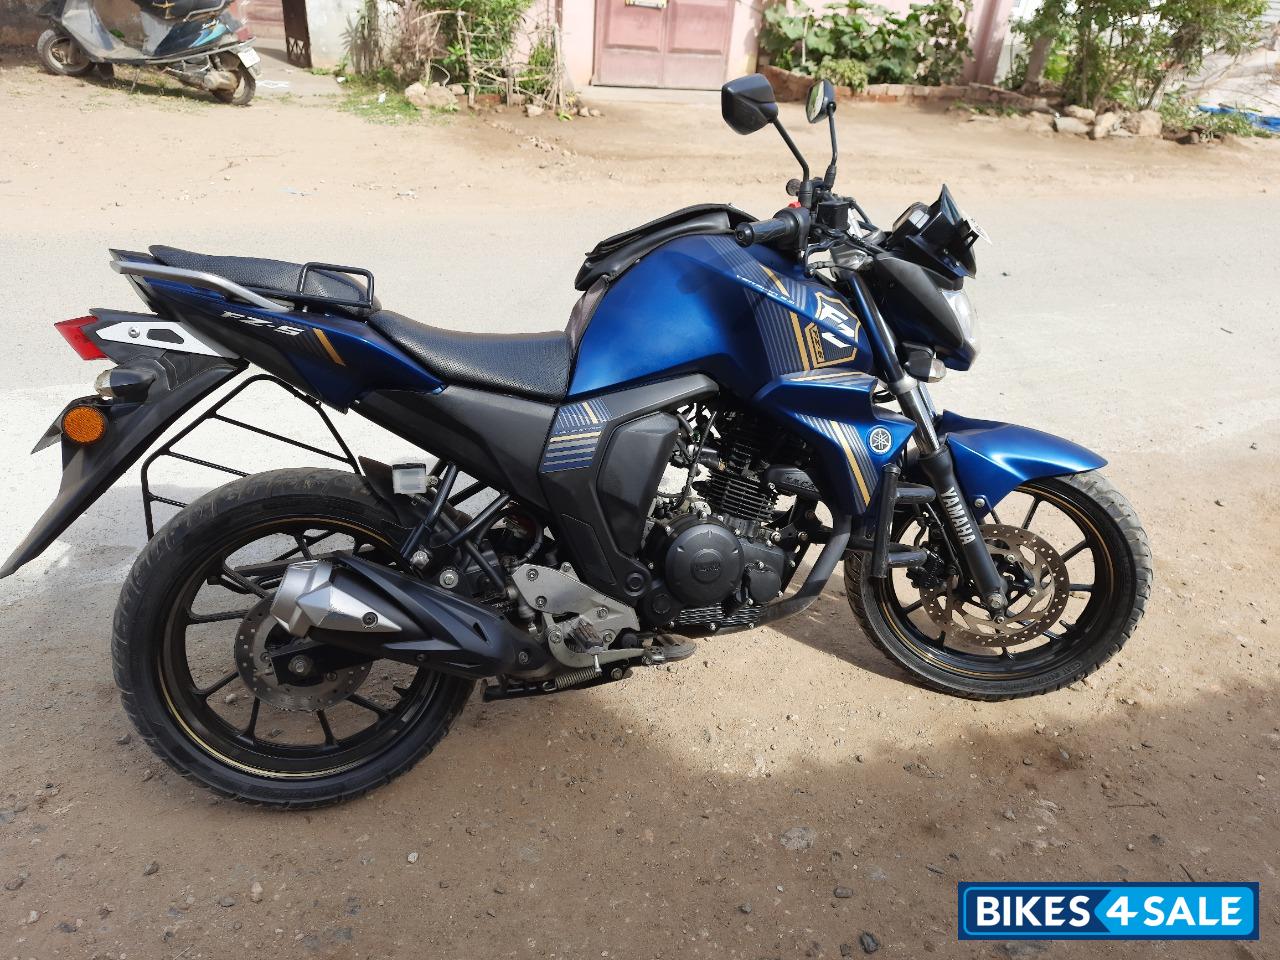 Used 2018 model Yamaha FZ-S FI V2 for sale in Coimbatore. ID 299845 ...